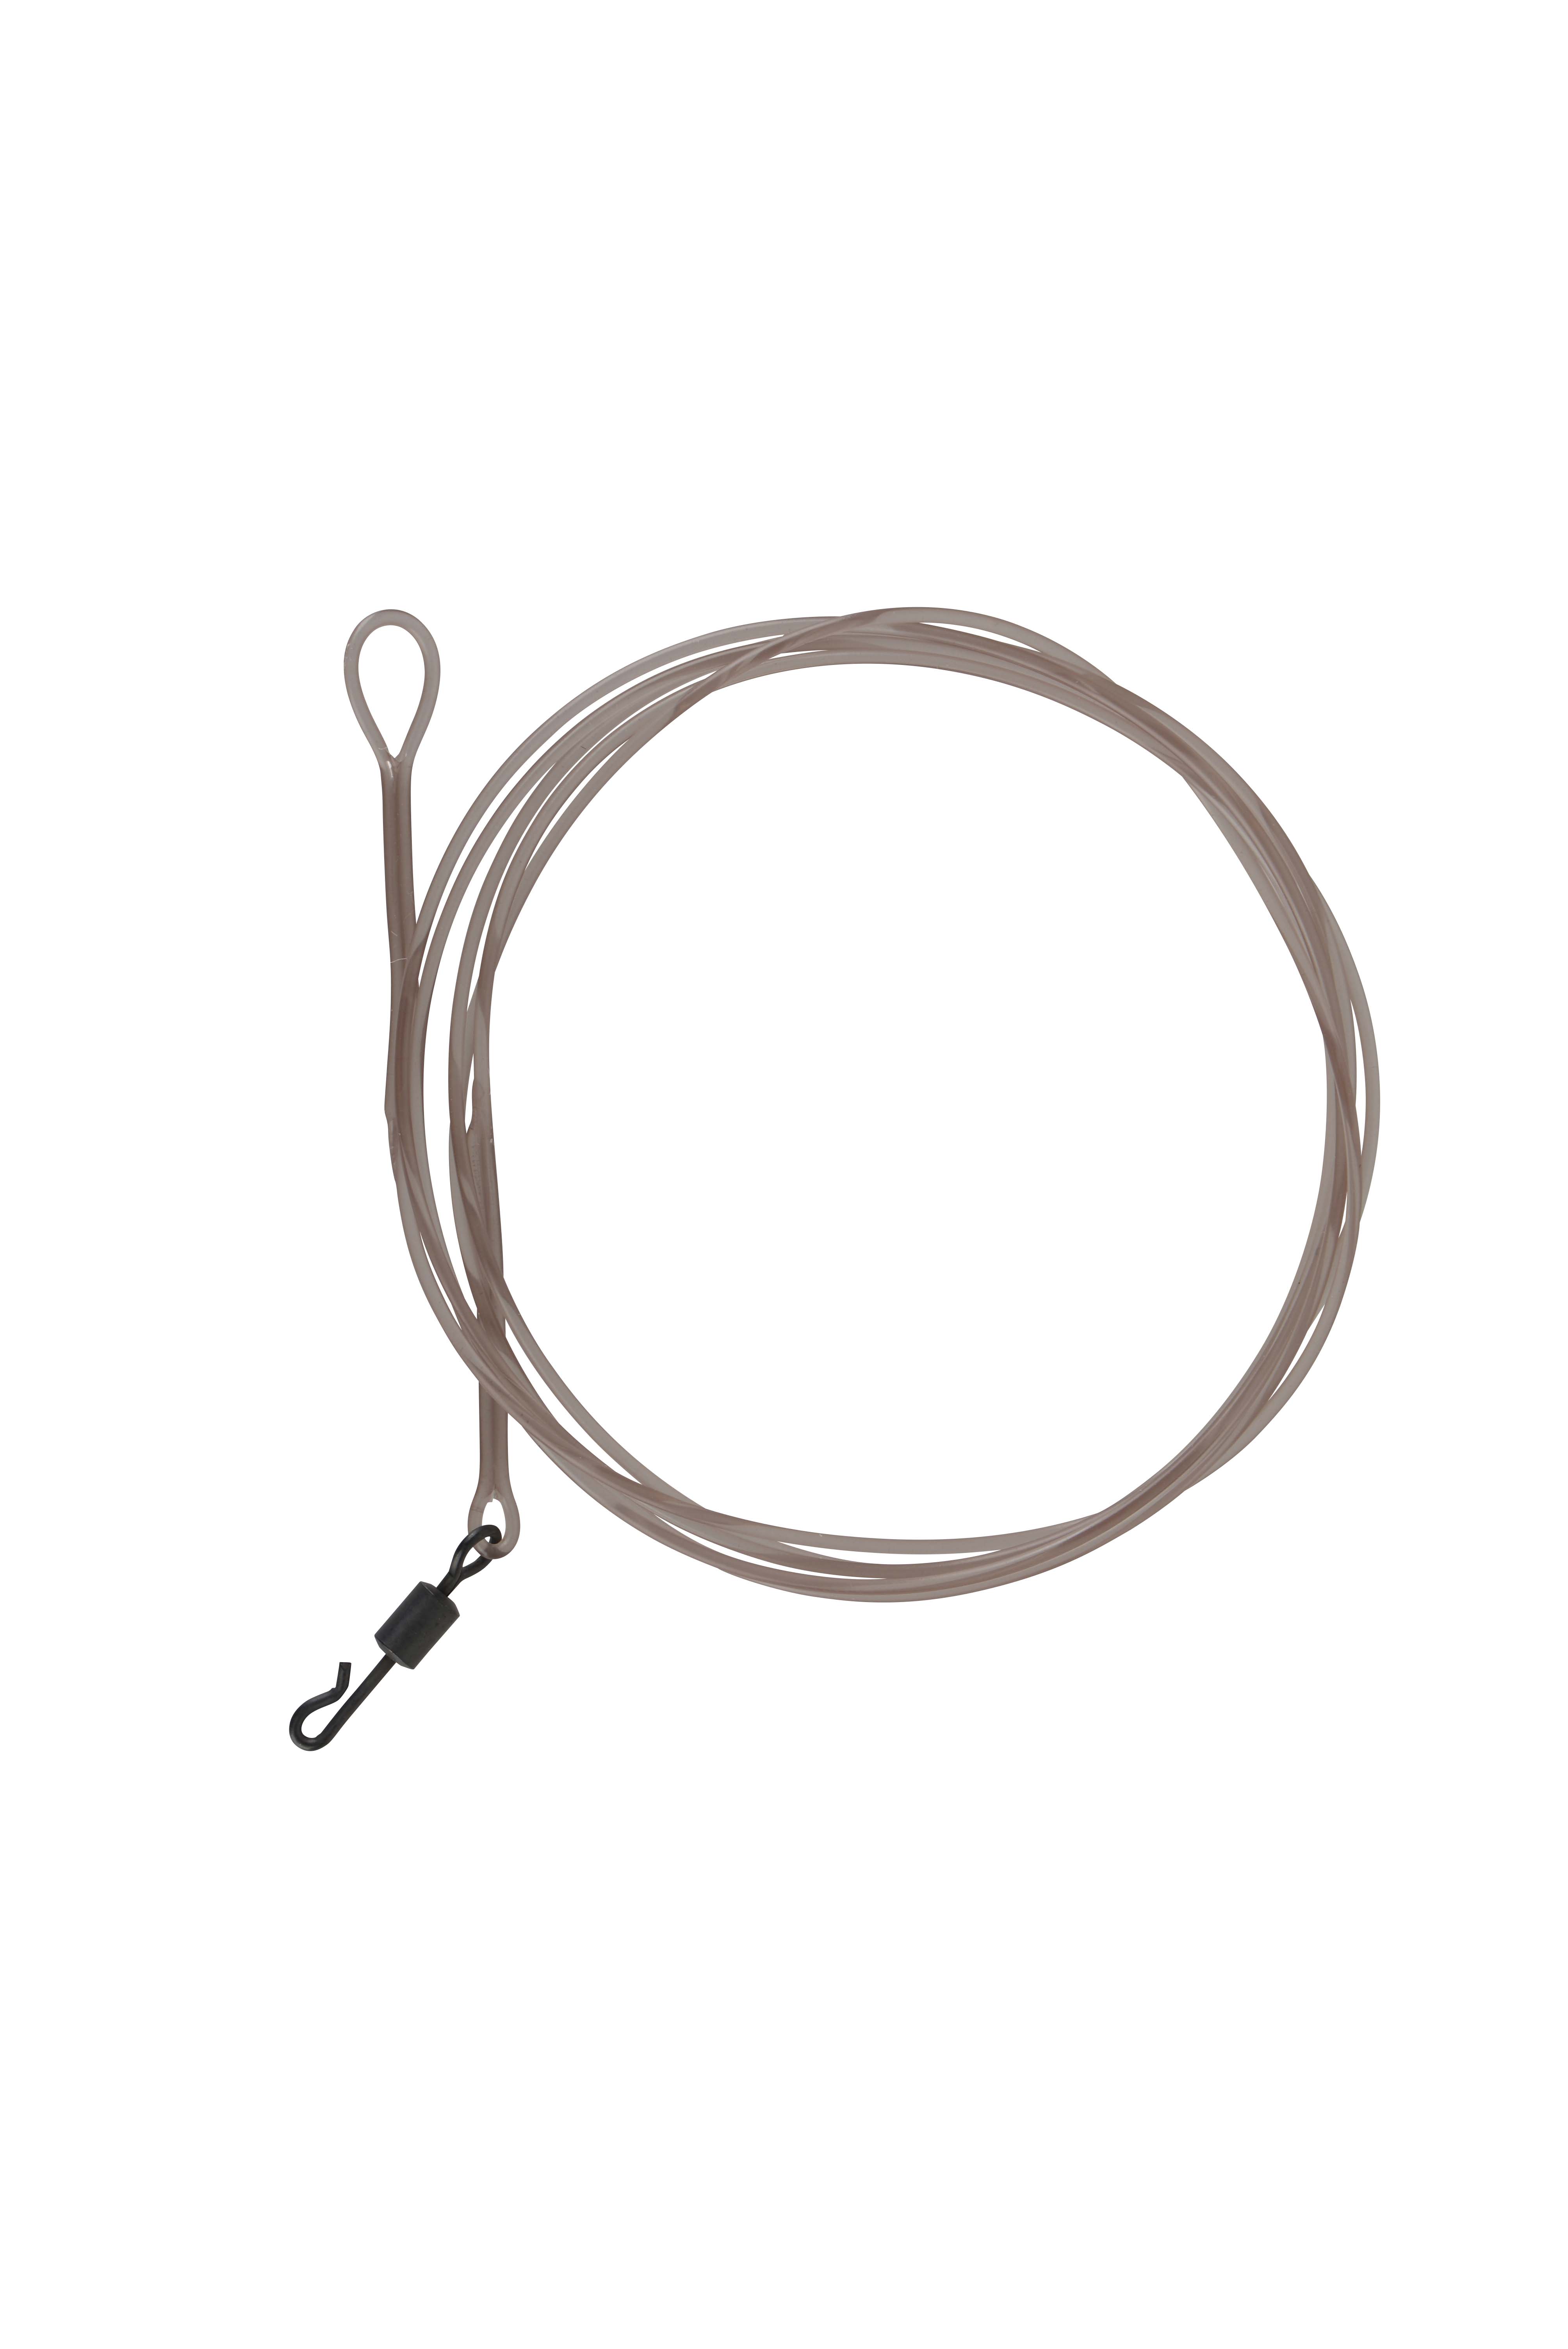 PROLOGIC LM MIRAGE LOOP LEADER 100CM 45LBS WITH QUICK CHANGE SWIVEL